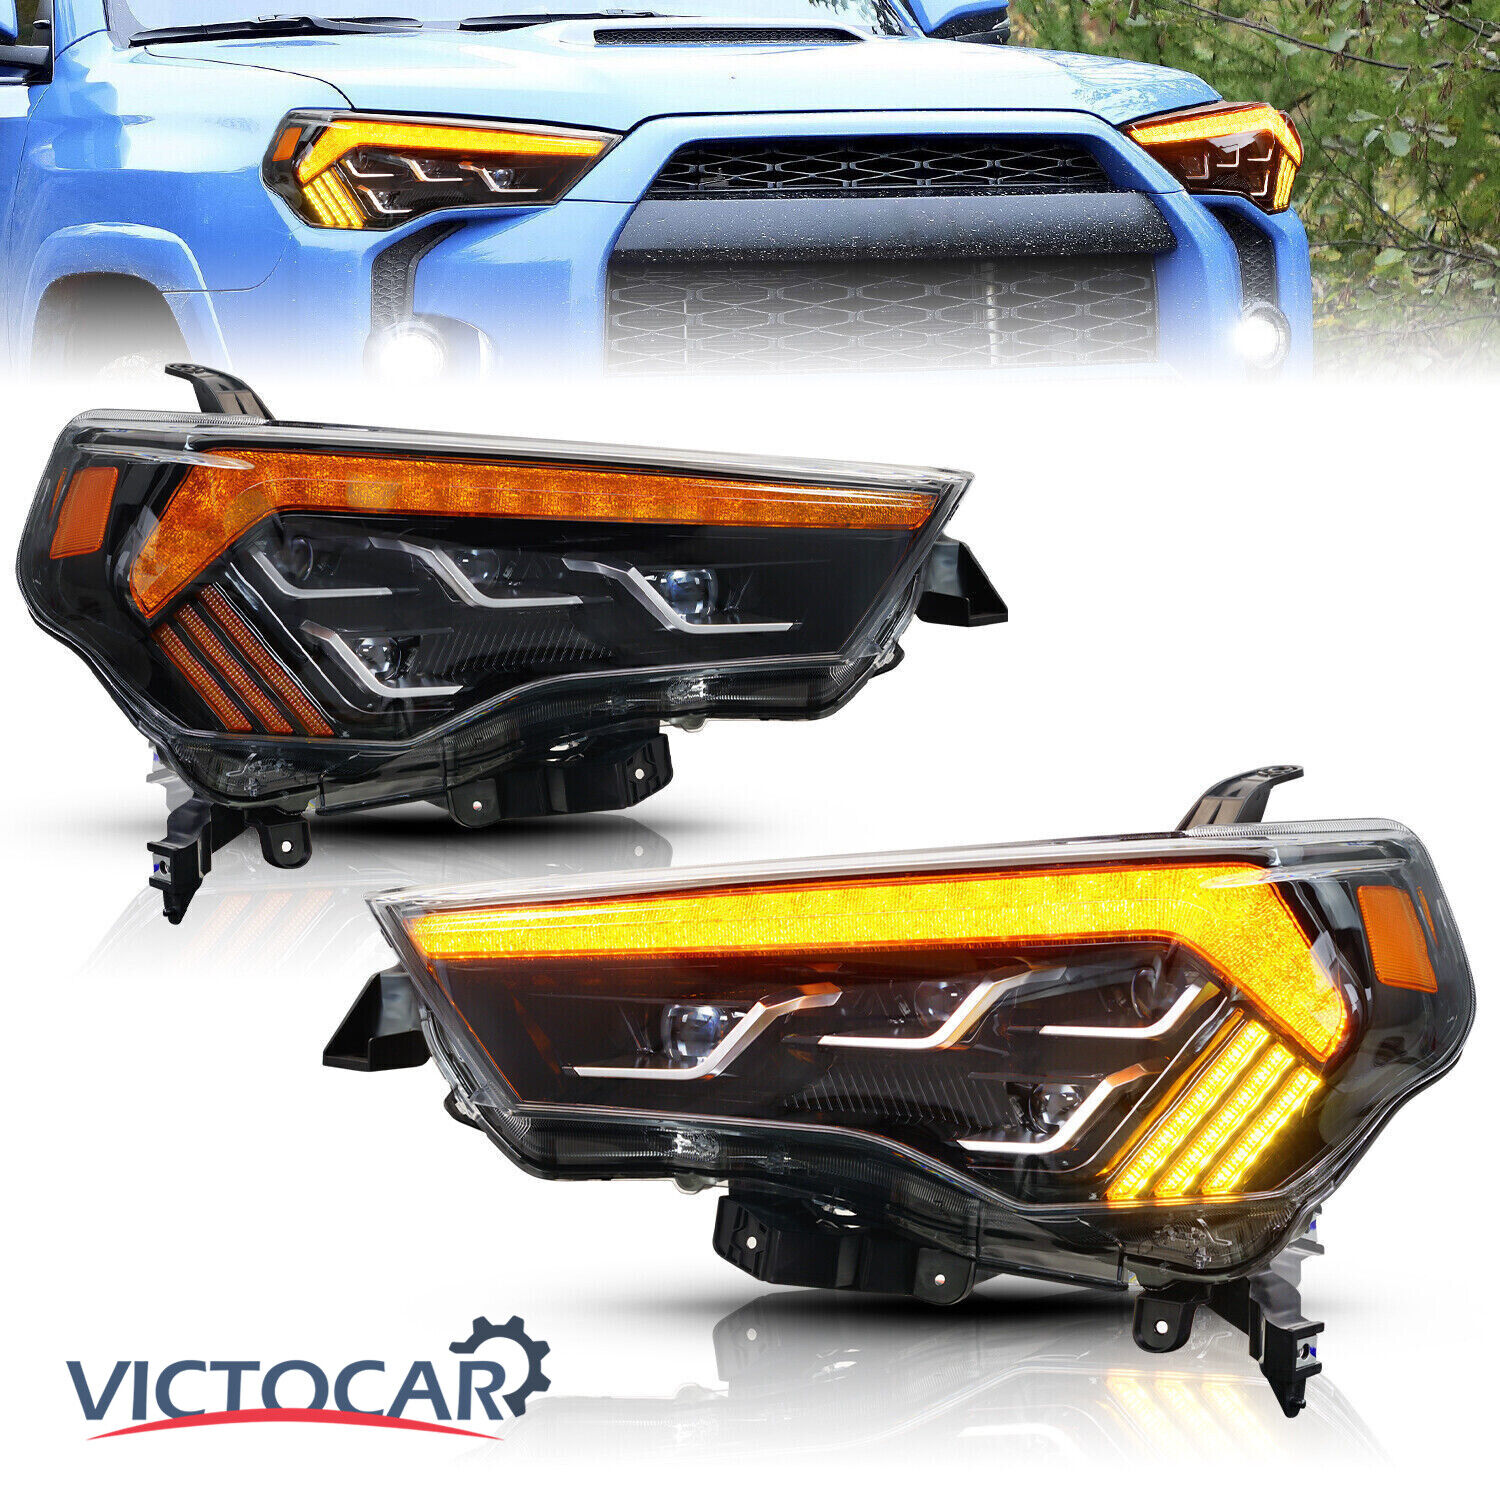 VICTOCAR Full Led Headlights for 4 Runner 2014-2020 Sequential Turn Signal Lamps